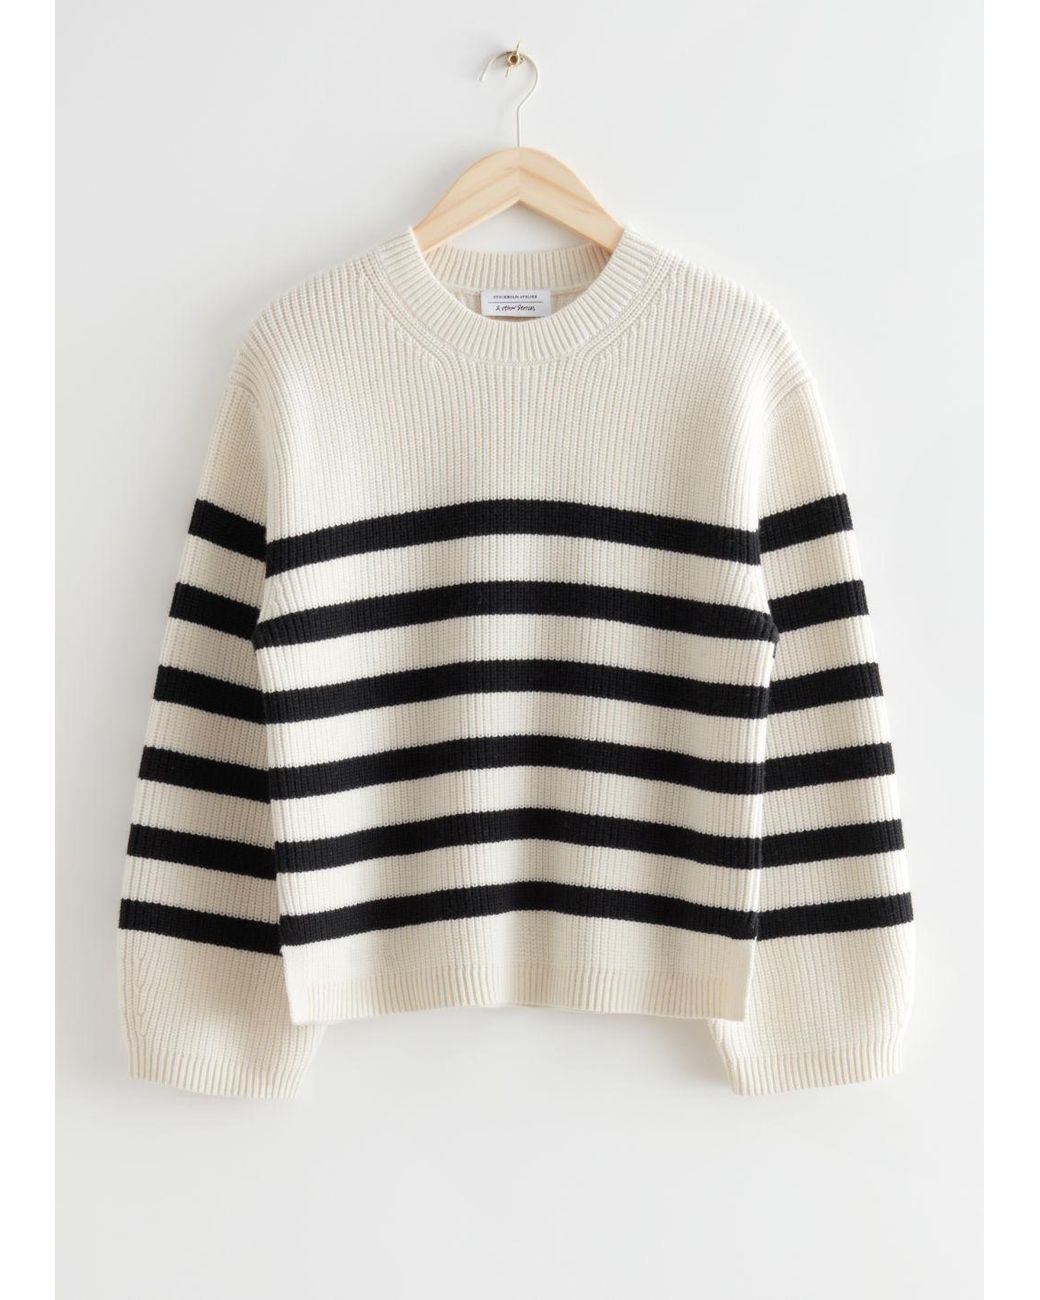 & Other Stories Striped Crewneck Knit Jumper in Black | Lyst